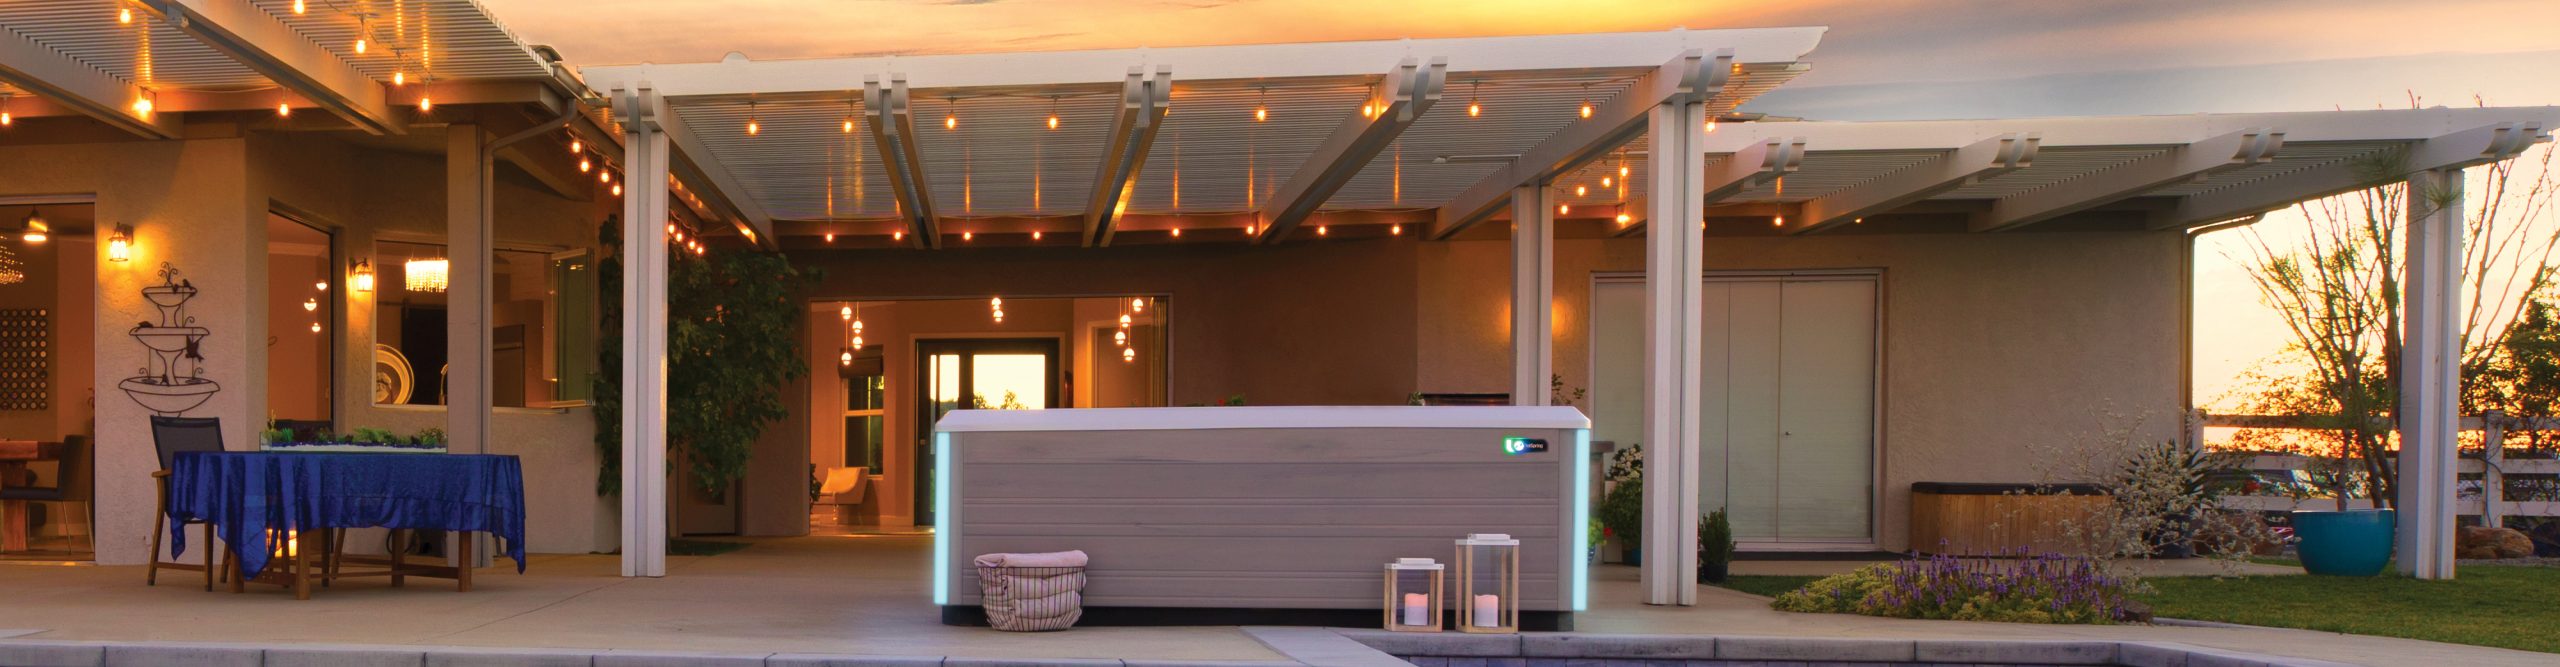 Feeling Edgy? Rediscover Yourself With a Hot Tub at Home, Spa Dealer Greenfield WI